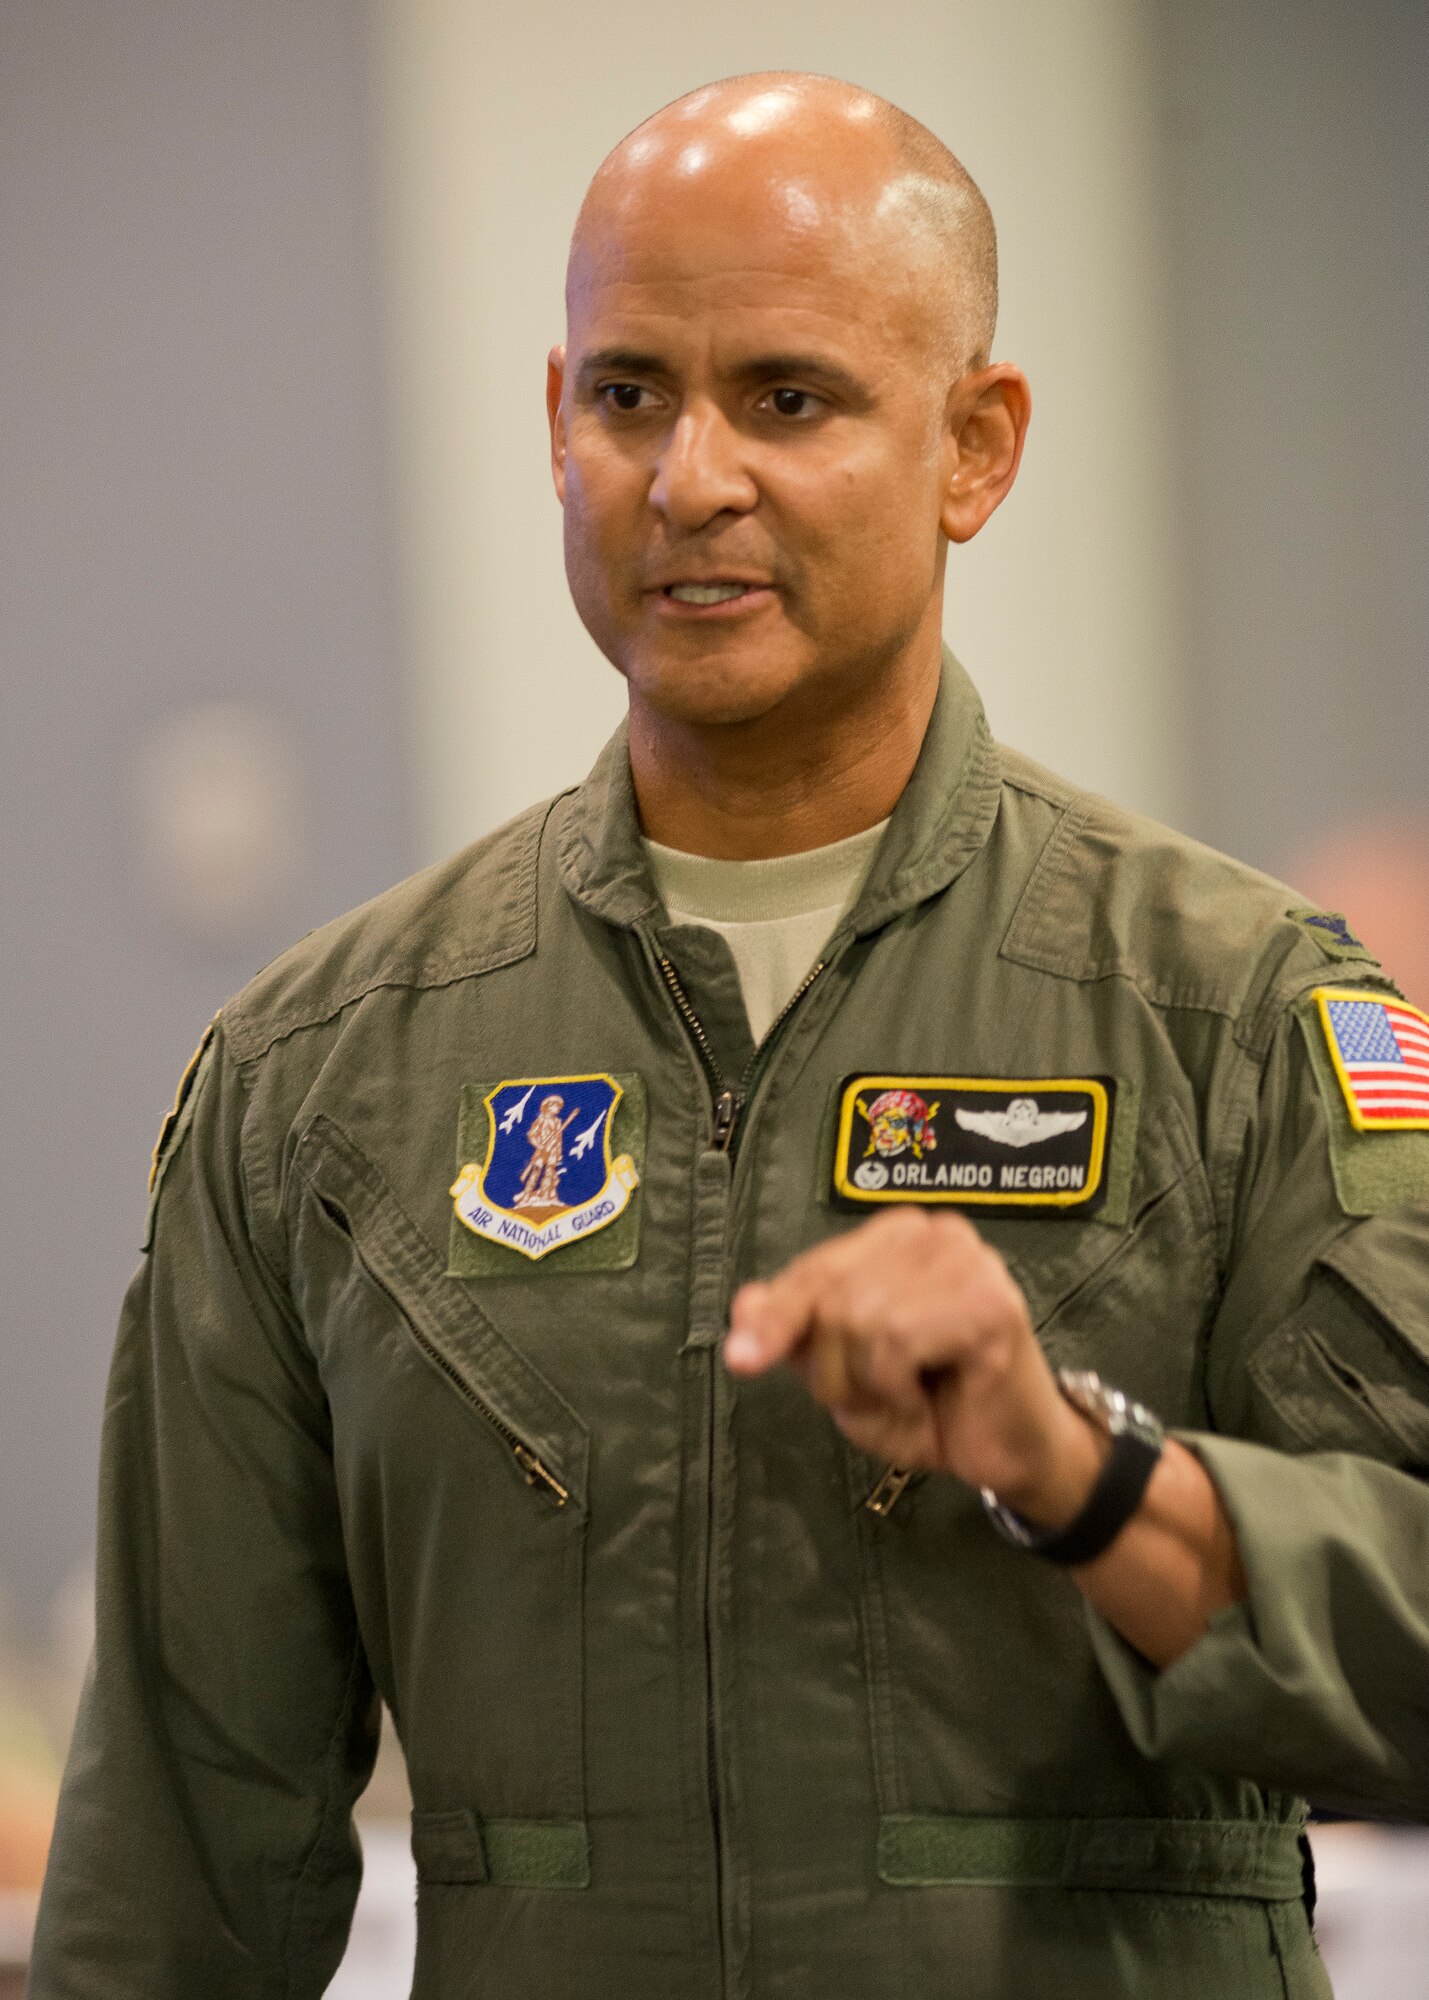 U.S. Air Force Col. Orlando E. Negron, Joint Force Headquarters Puerto Rico Air National Guard director of operations, introduces the first PRANG State of the Commonwealth briefing, March 1, 2016. The 156th Airlift Wing leadership of the PRANG presented their SoC briefing before the Air National Guard Readiness Center at Joint Base Andrews Air Force Base, Maryland. (U.S. Air National Guard photo by Master Sgt. Marvin R. Preston)